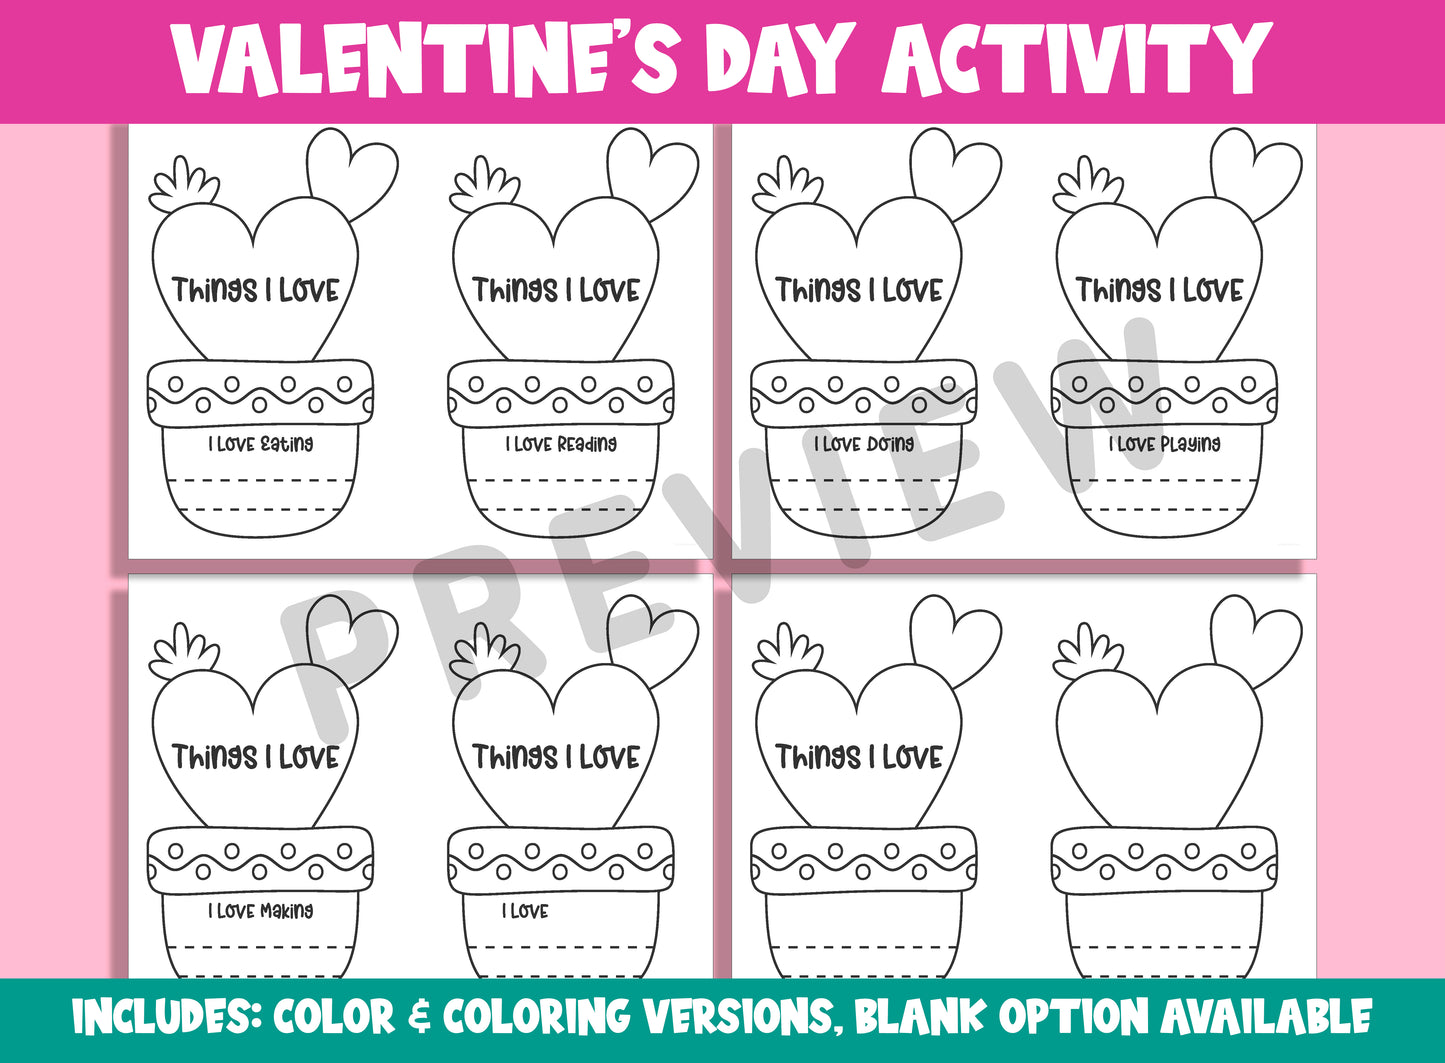 Valentines Day Activity, Paper Craft + Writing, Print, Cut, Color & Write, a Fun Way for Students to Record Some of the Things They Love